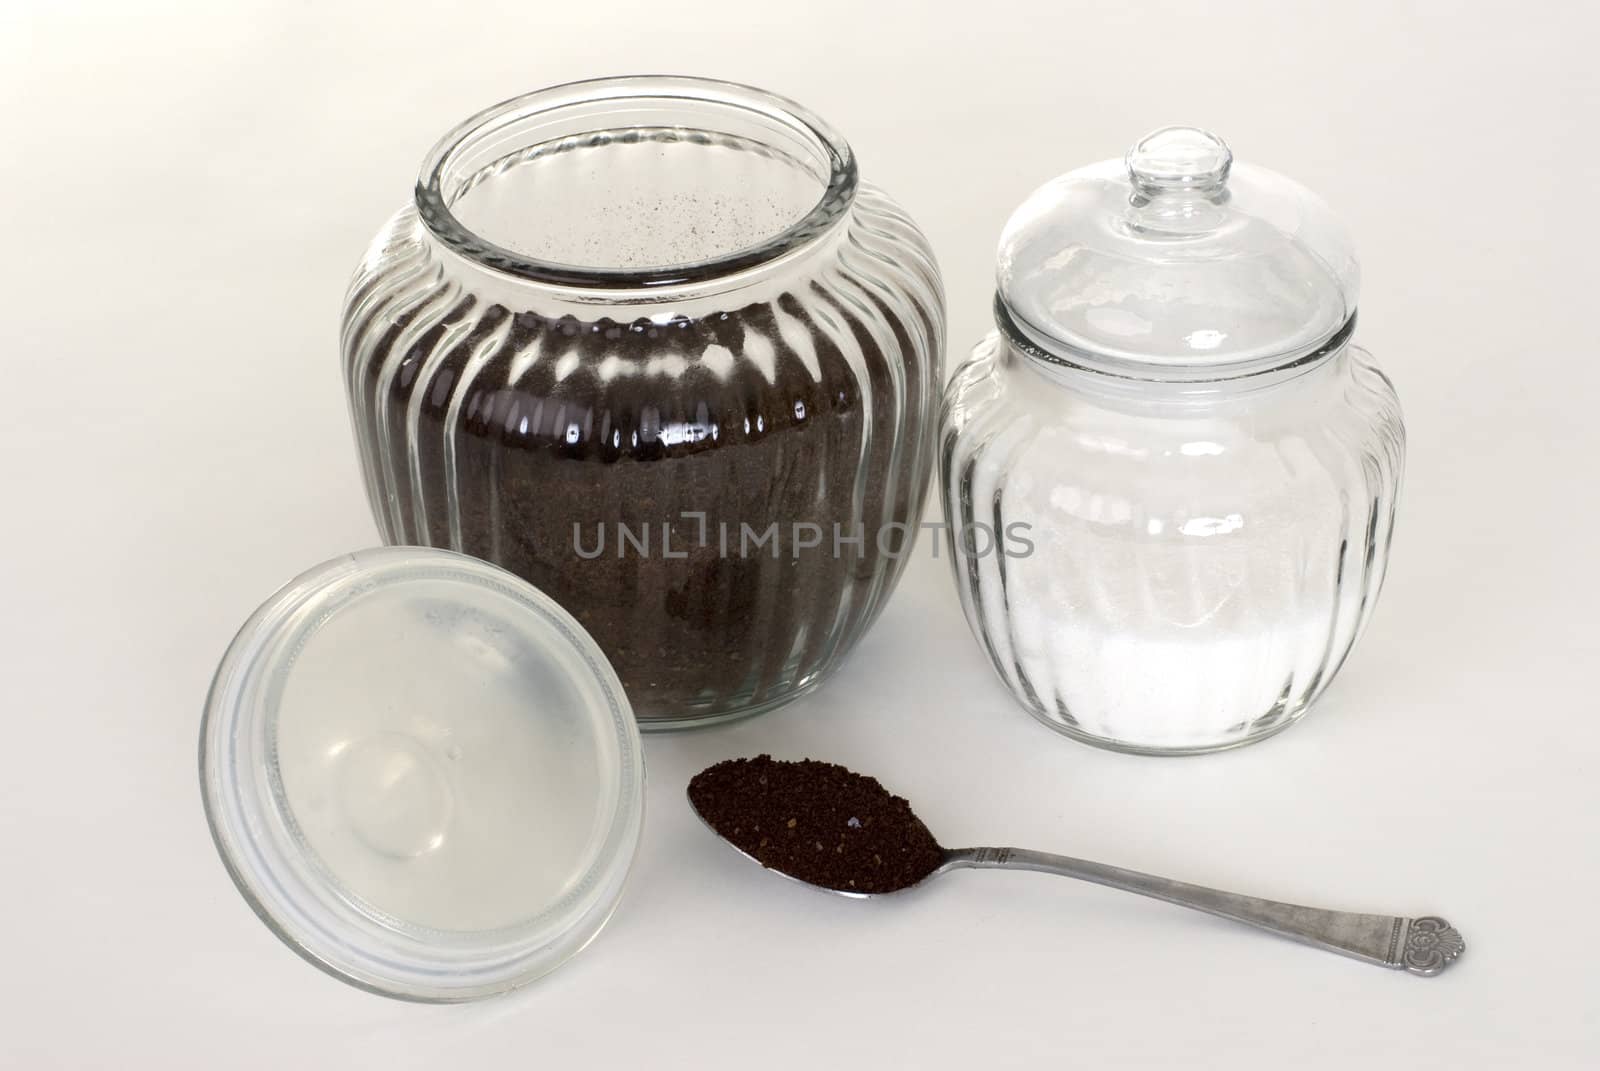 A jar of coffee and sugar on a white background.